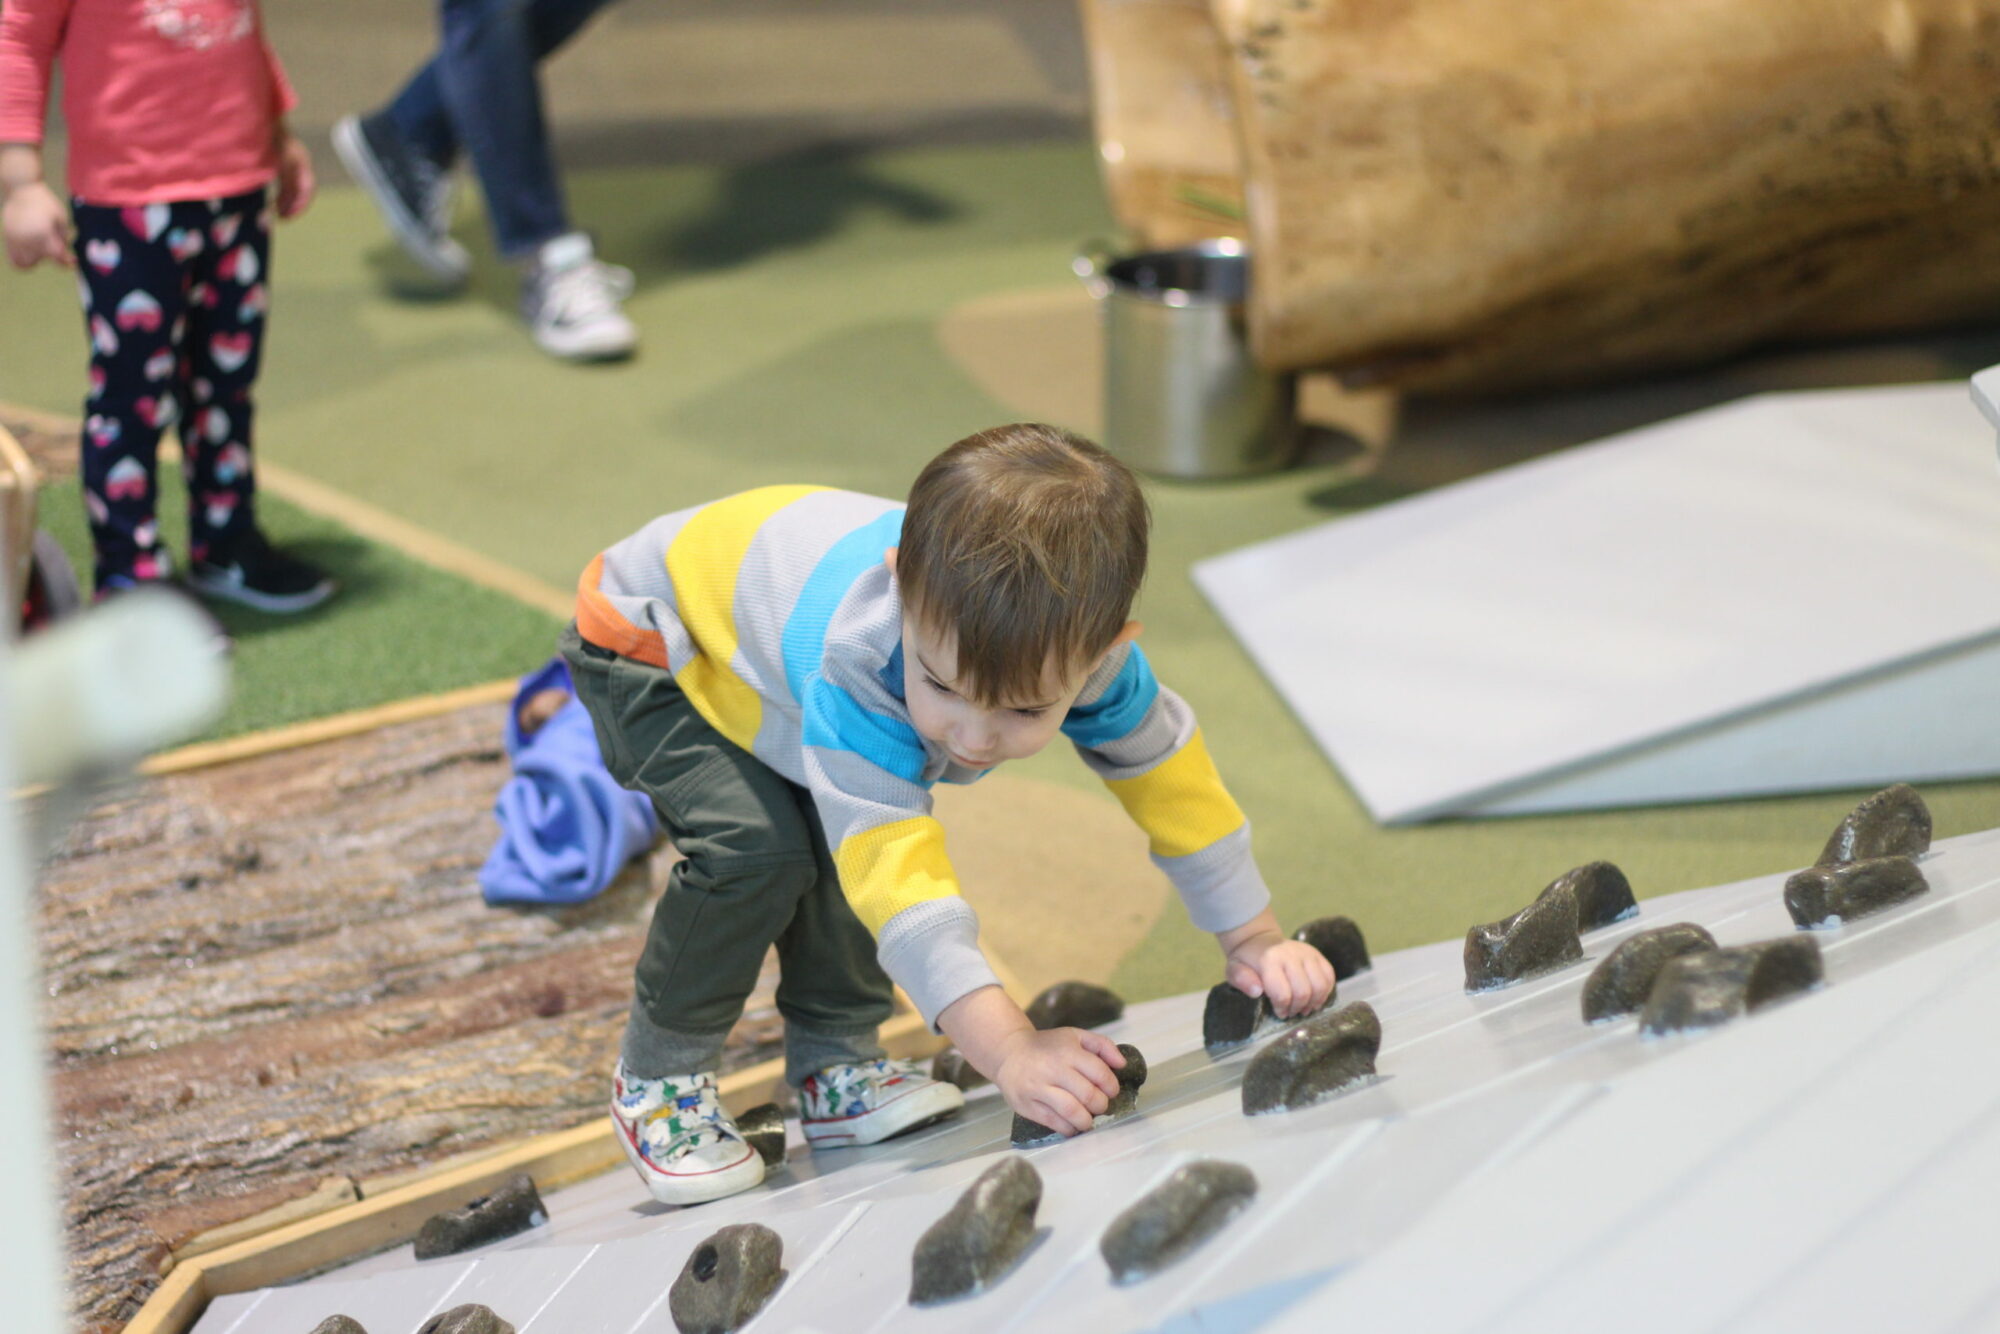 Developing Gross Motor Skills on the climbing ramp in the Infant and Toddler Play Porch Exhibit at the Children's Museum of Southern Minnesota